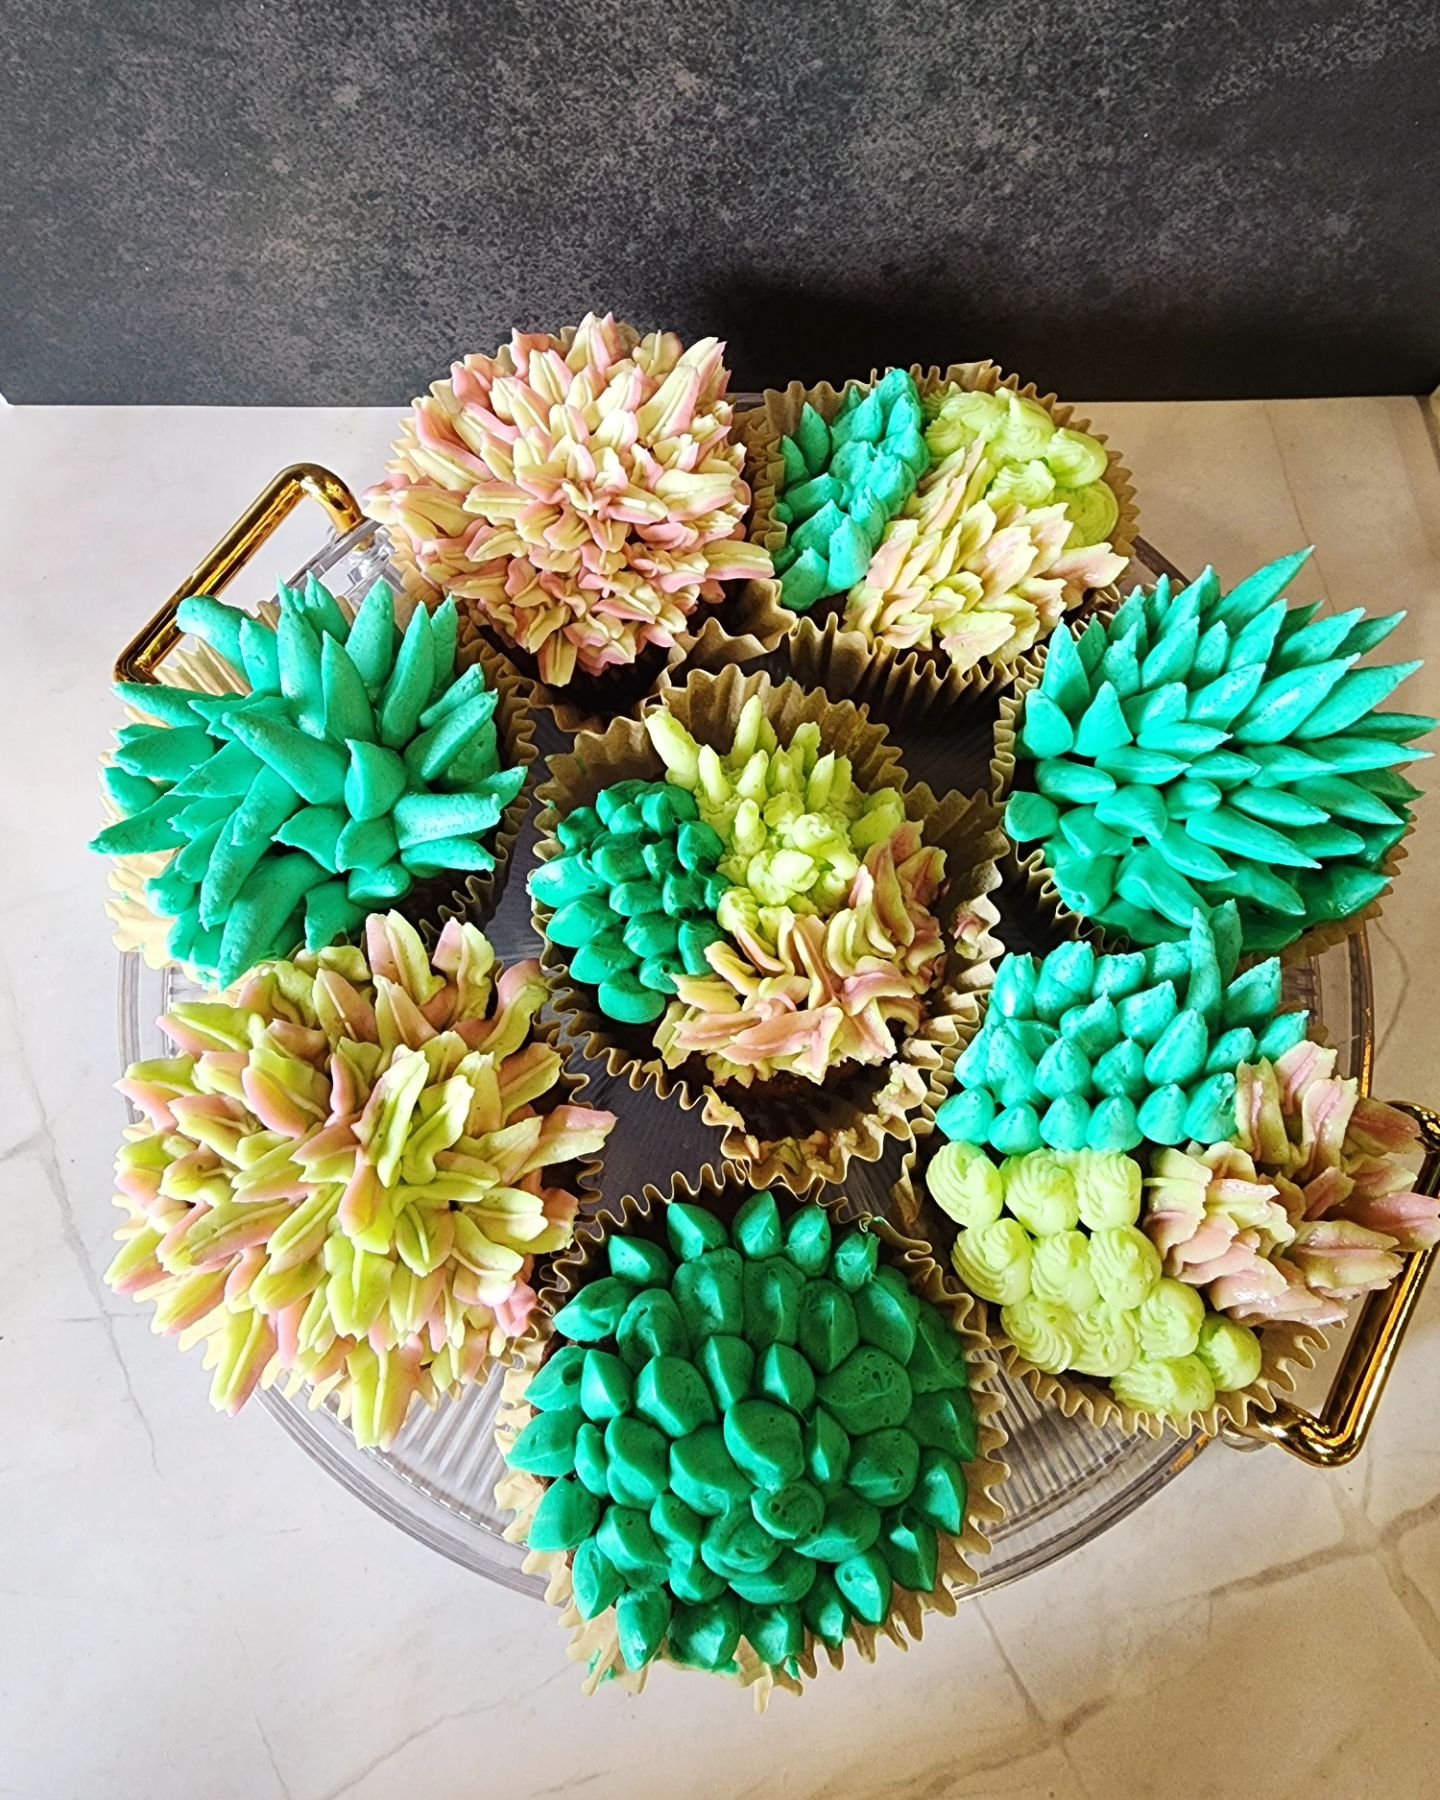 don't let your friday suck,
🌵come by and get a succulent cupcake!🌵
tiffany worked real hard on these!
》chocolate cupcakes with vanilla buttercream icing
🤤🤤

here until 6 tonight,
9-3 tomorrow 

618-491-0901 
4025 Pontoon Road 
Www.steelcitycheese